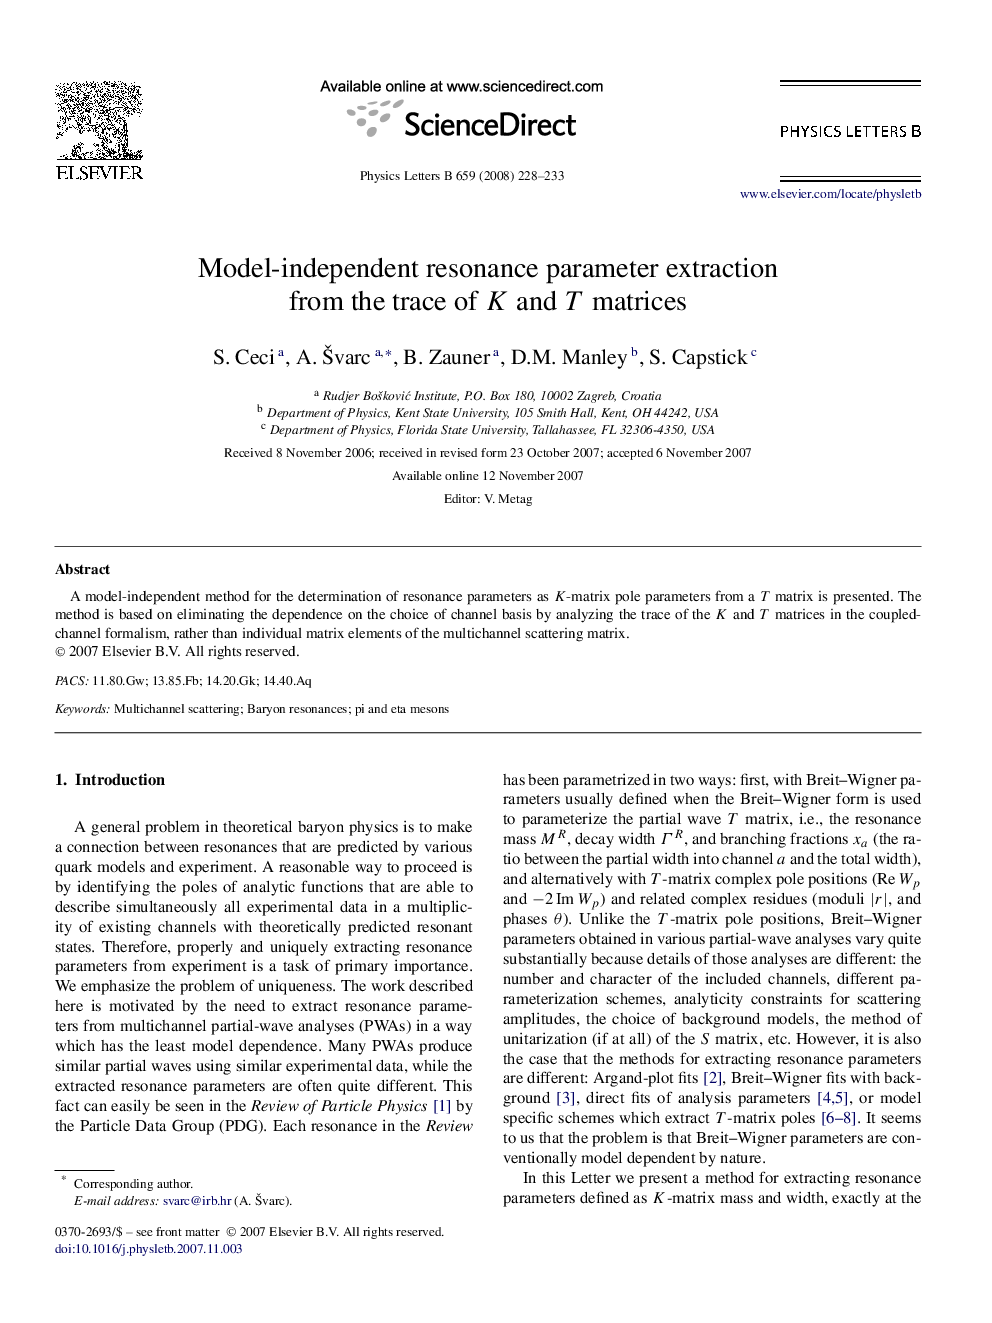 Model-independent resonance parameter extraction from the trace of K and T matrices